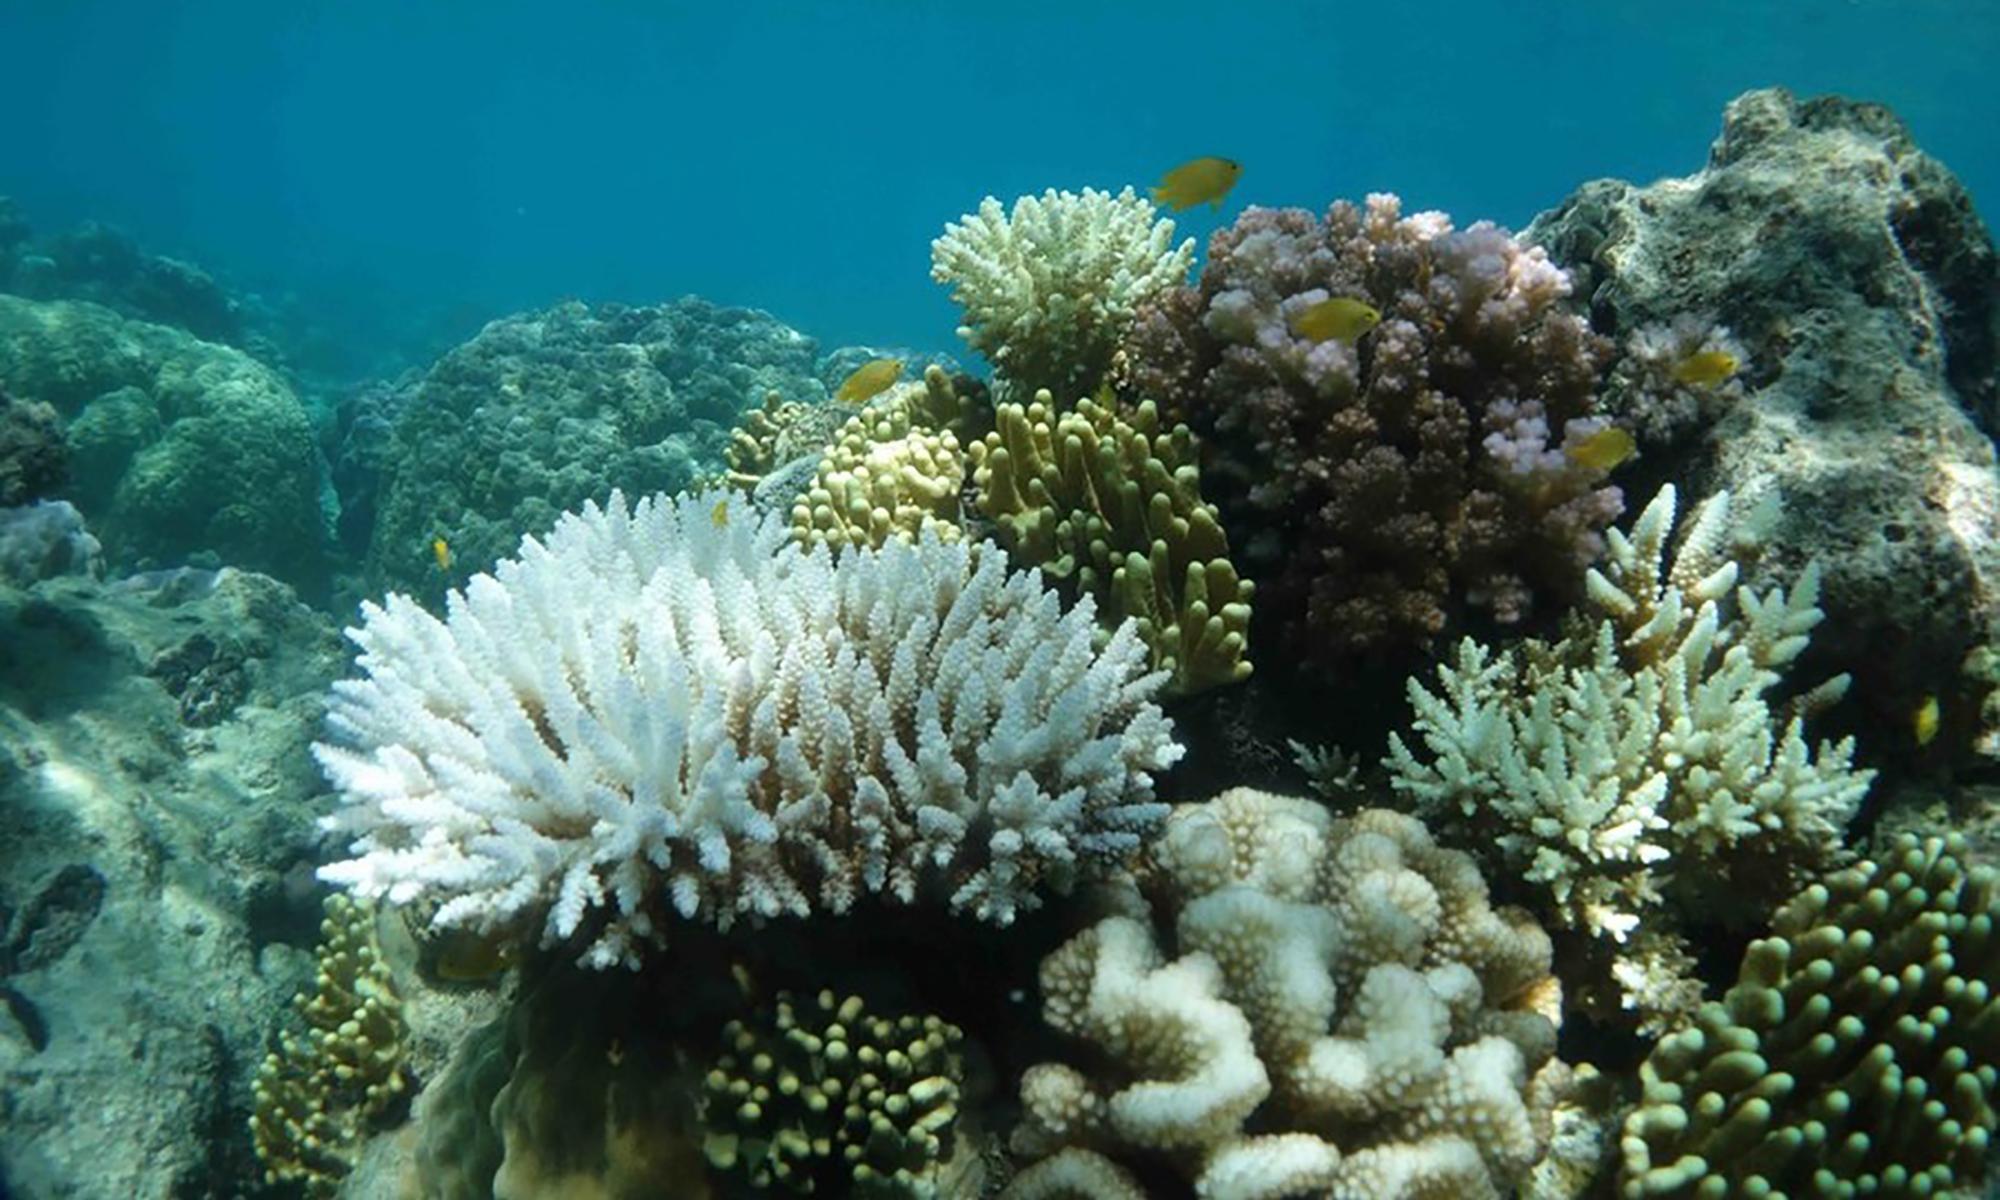 Great Barrier Reef could face 'most extensive coral bleaching ever', scientists say